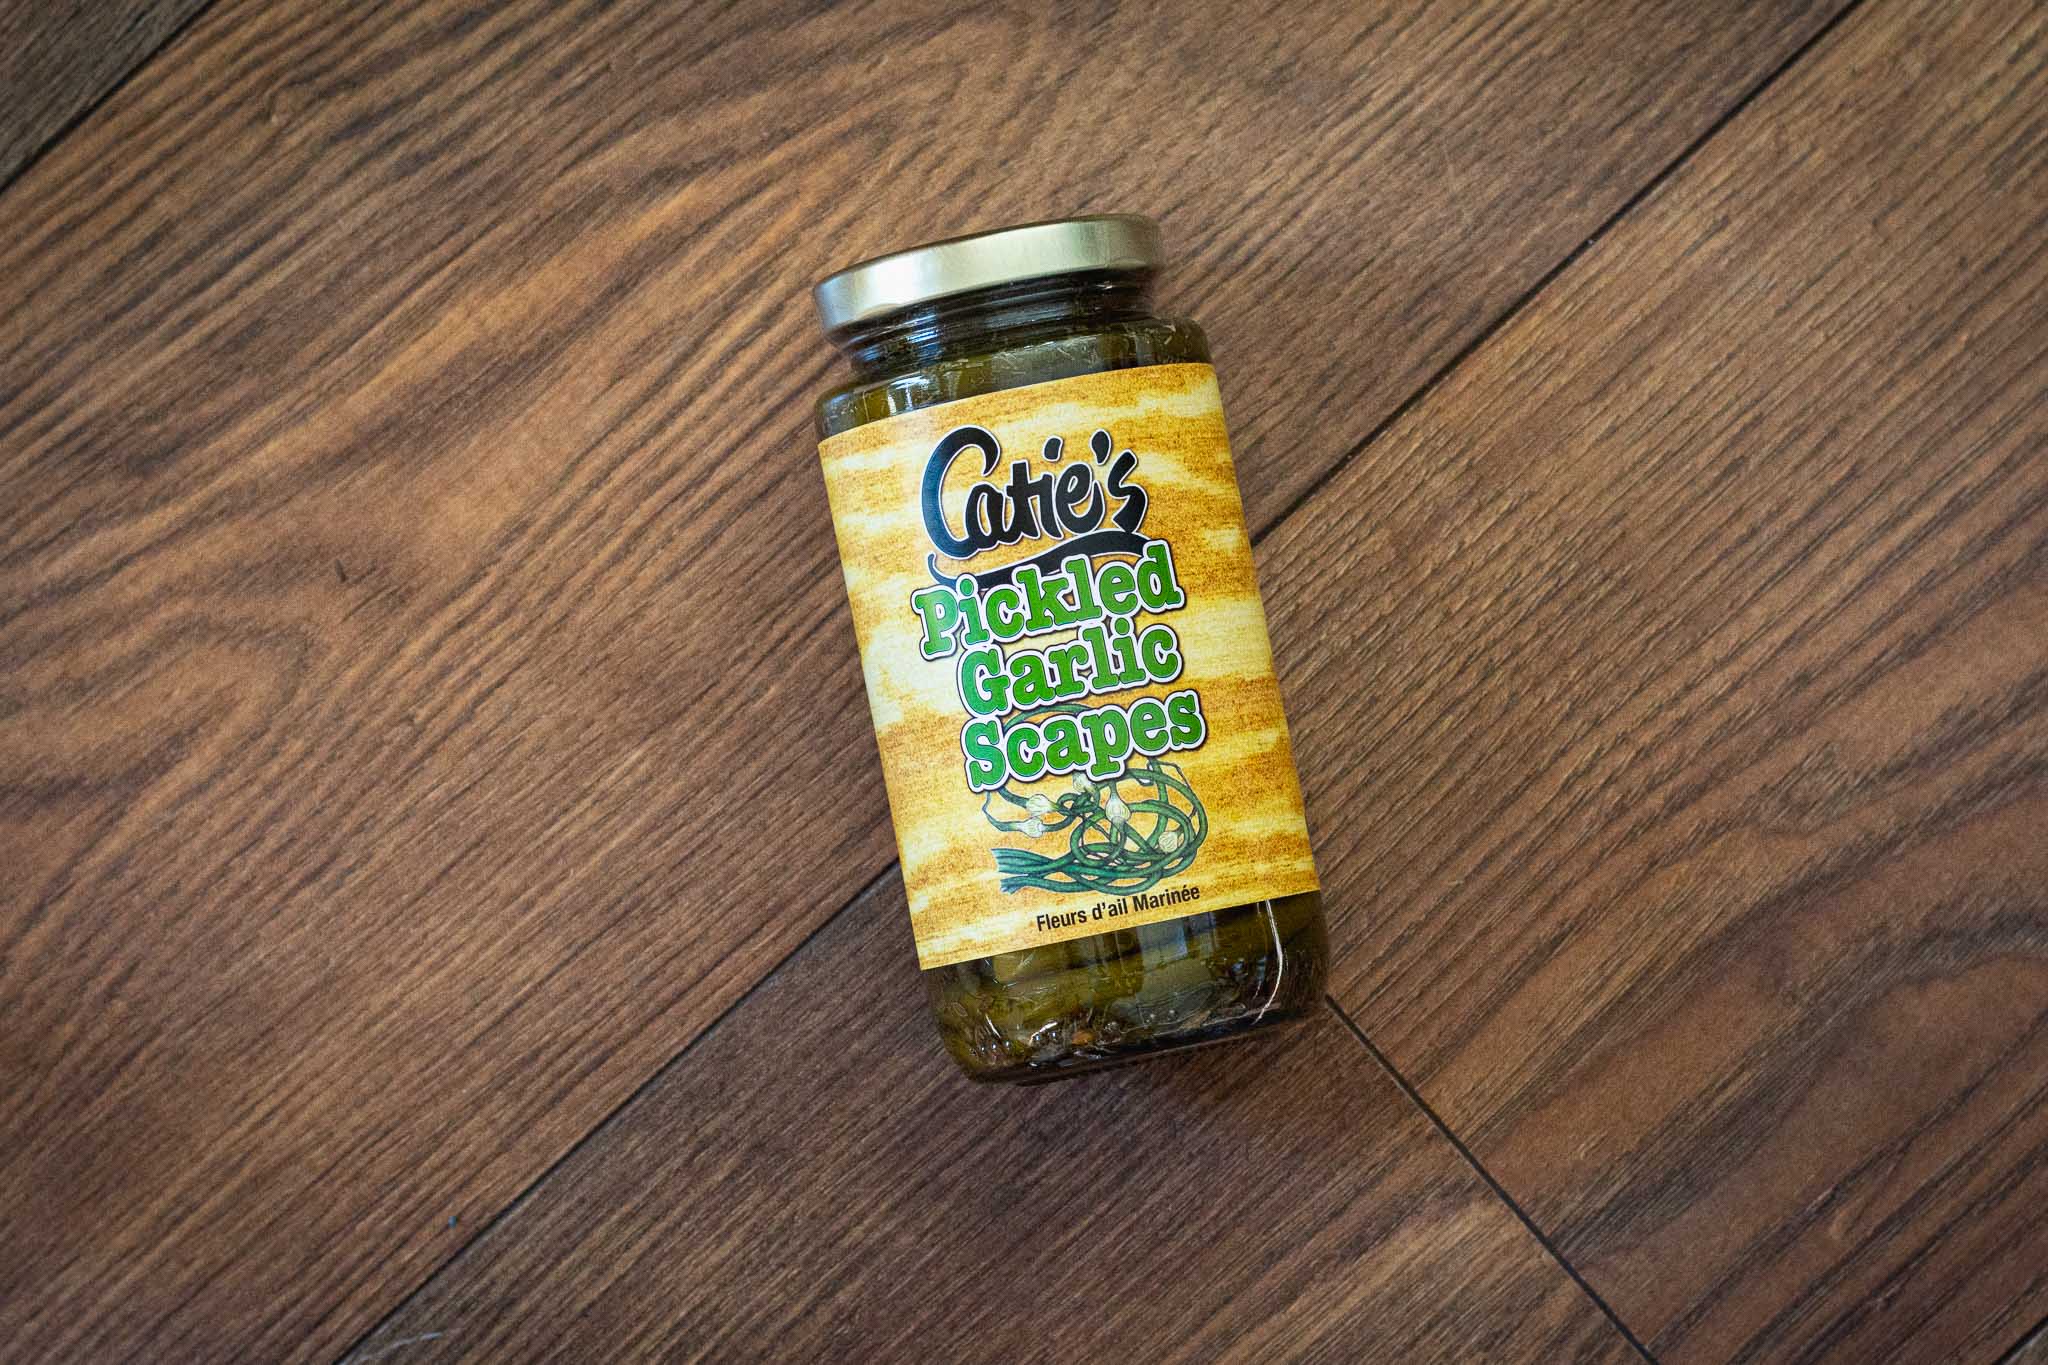 Pickled Garlic Scapes by Catie’s Preserves